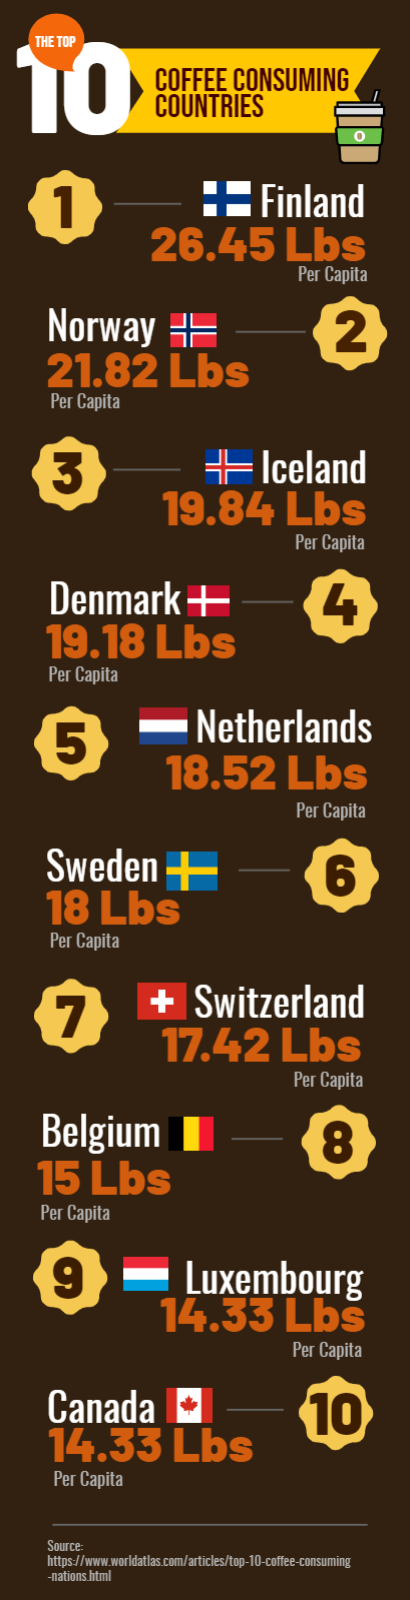 The Top Coffee-Consuming Countries